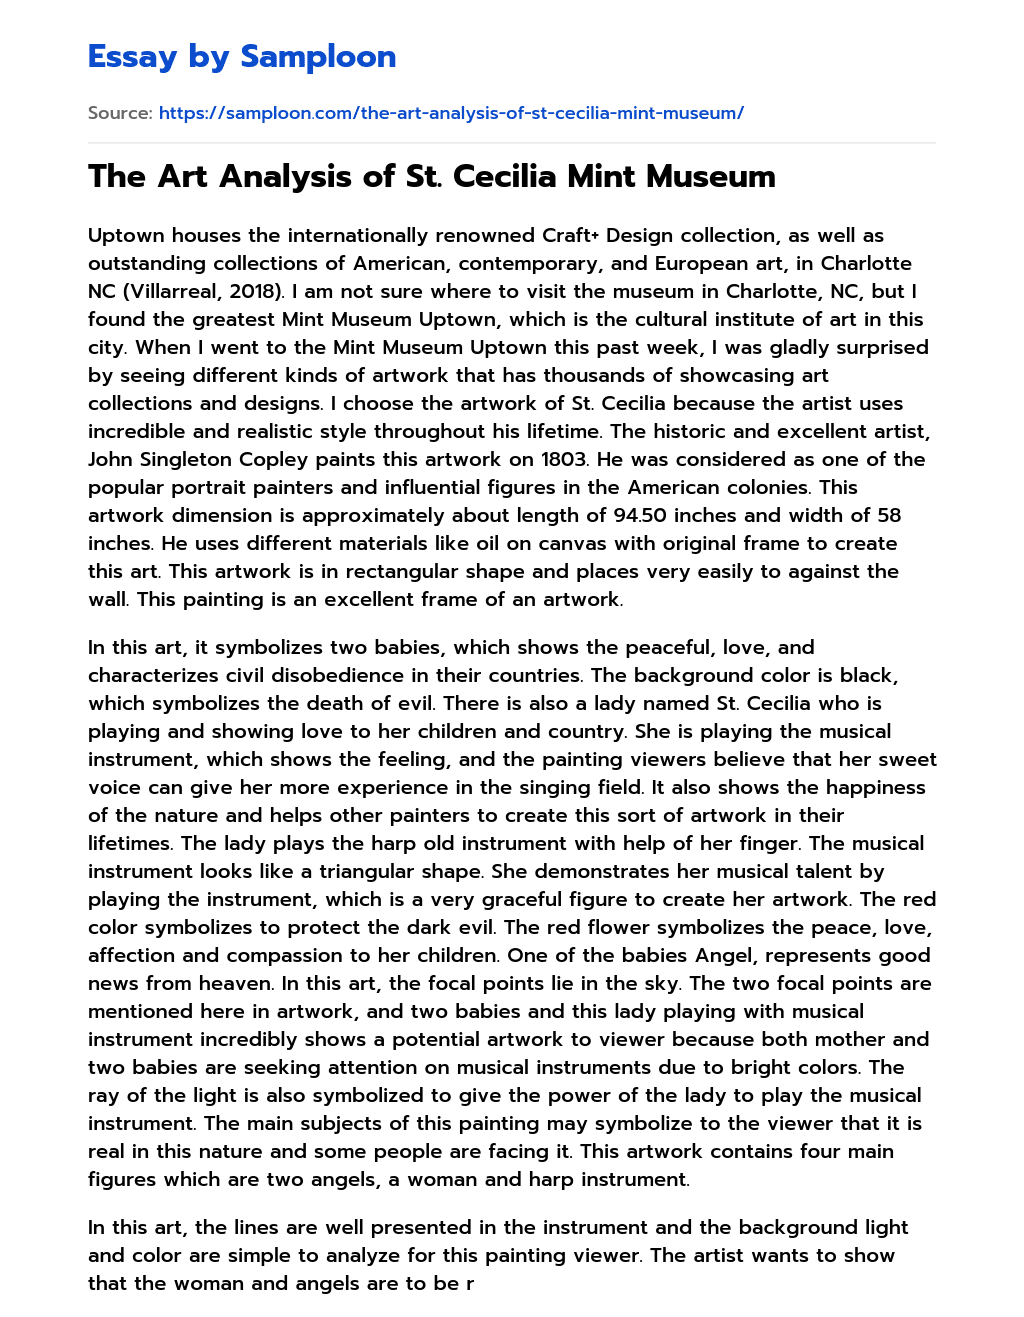 The Art Analysis of St. Cecilia Mint Museum essay